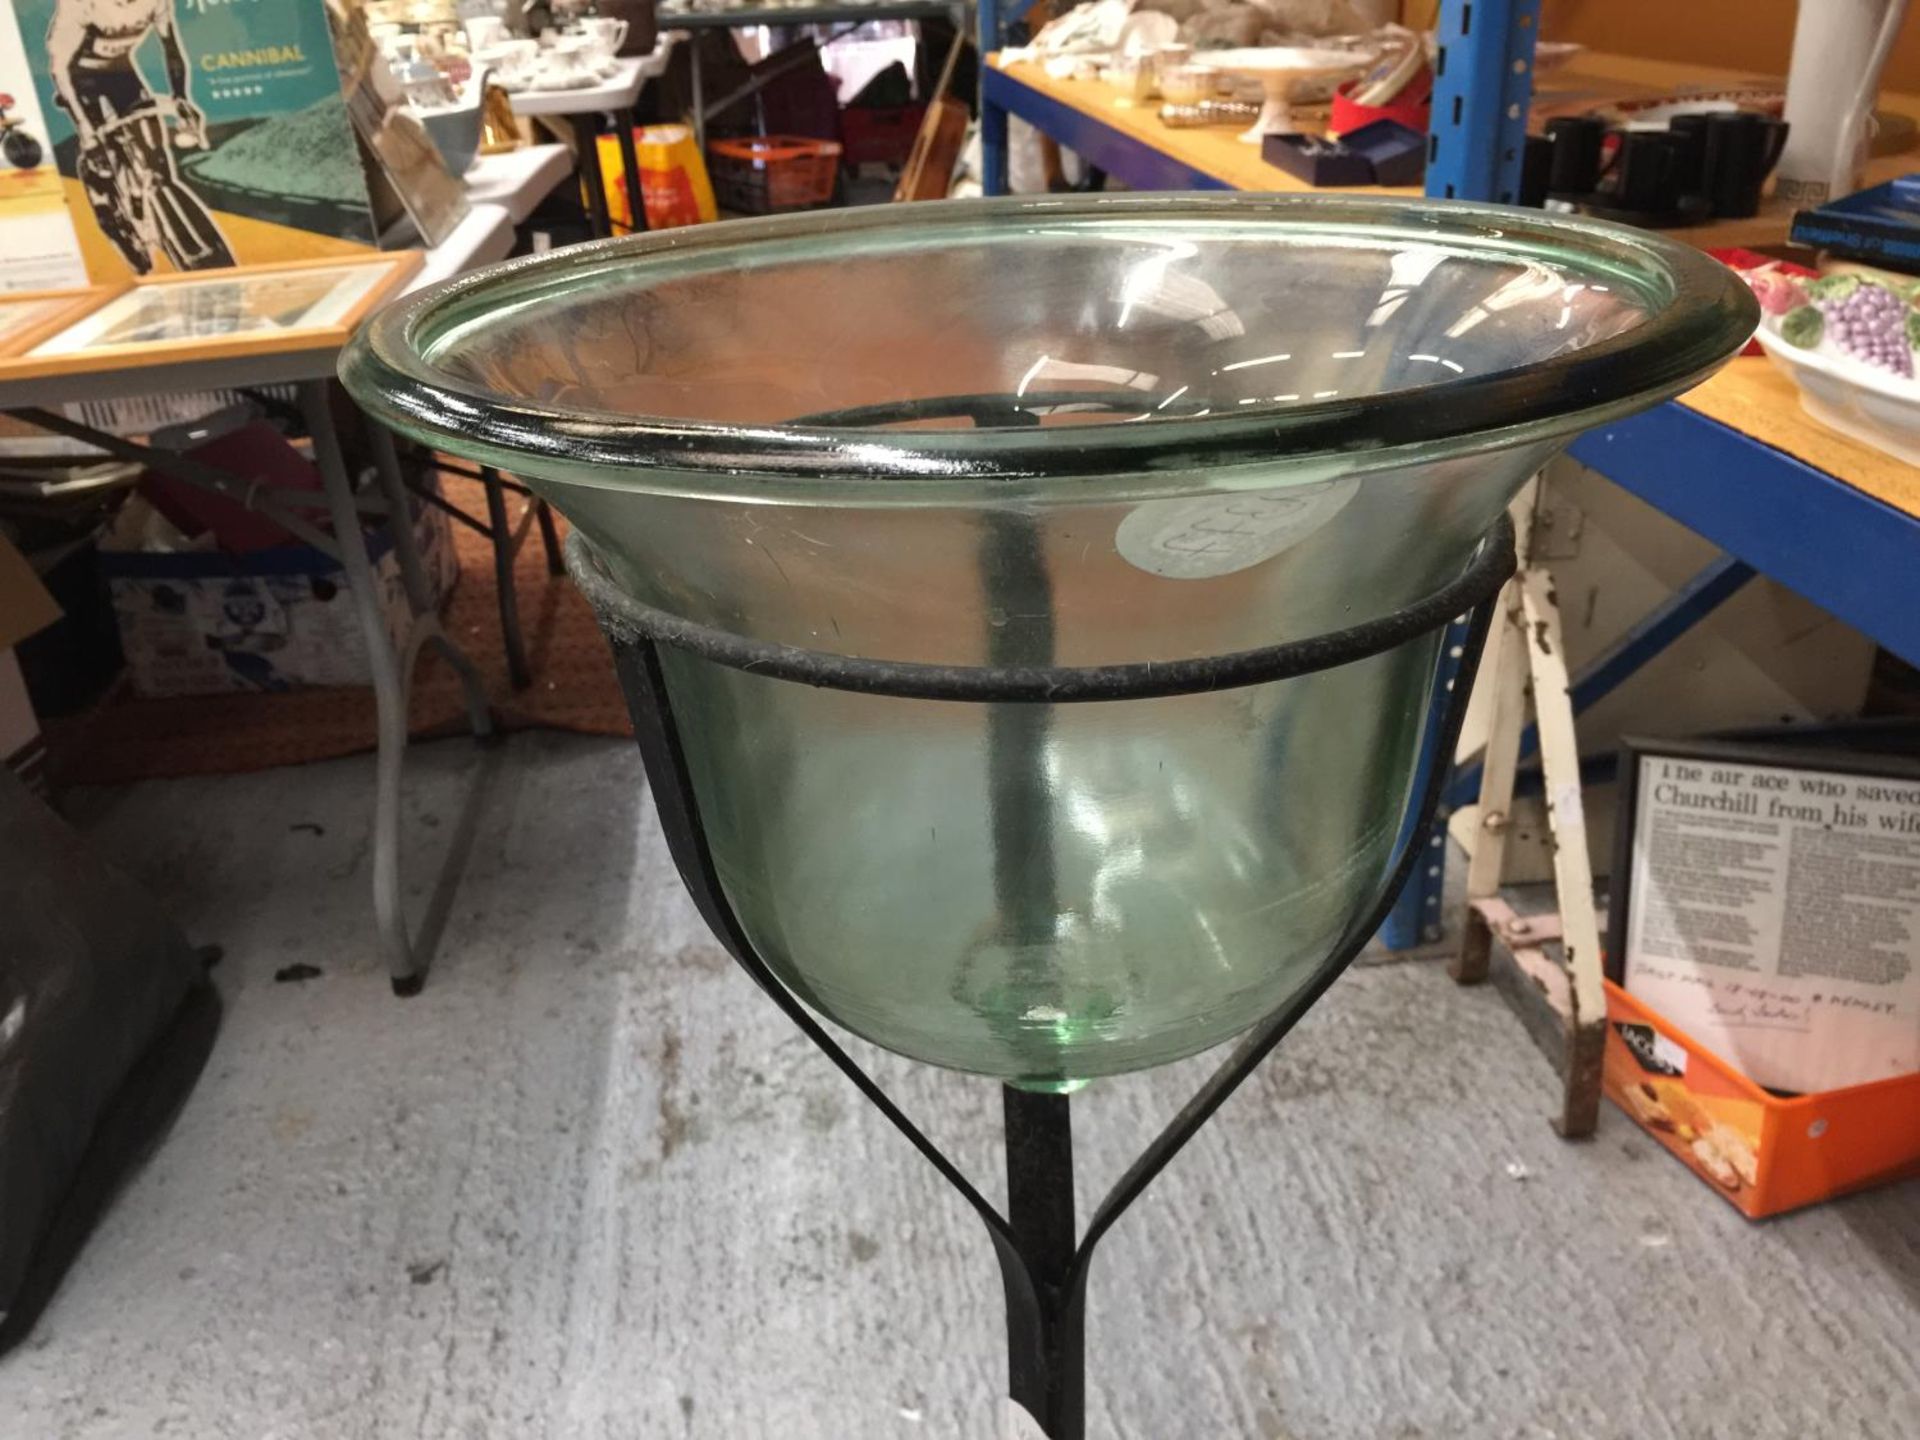 A LARGE BELL SHAPED GLASS BOWL ON A WROUGHT IRON STAND H: 96CM - Image 4 of 4